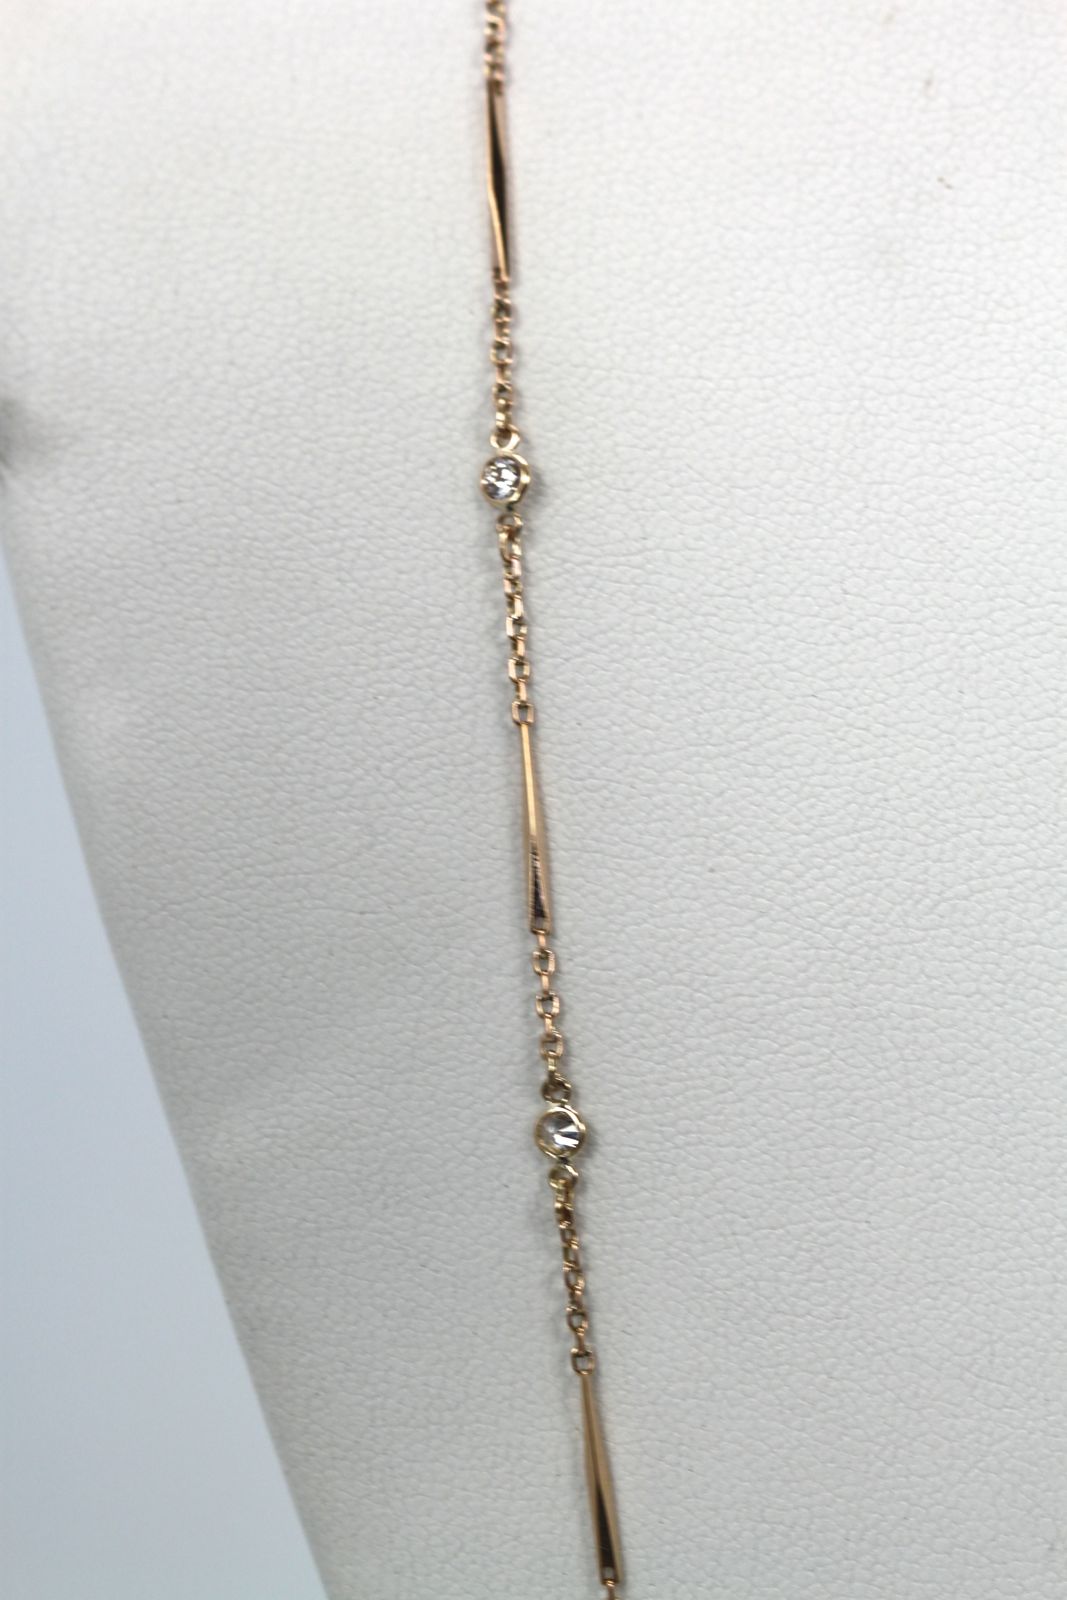 Vintage 14K Yellow Gold Bar and link Chain with 1.38 Carats of Diamonds Detail